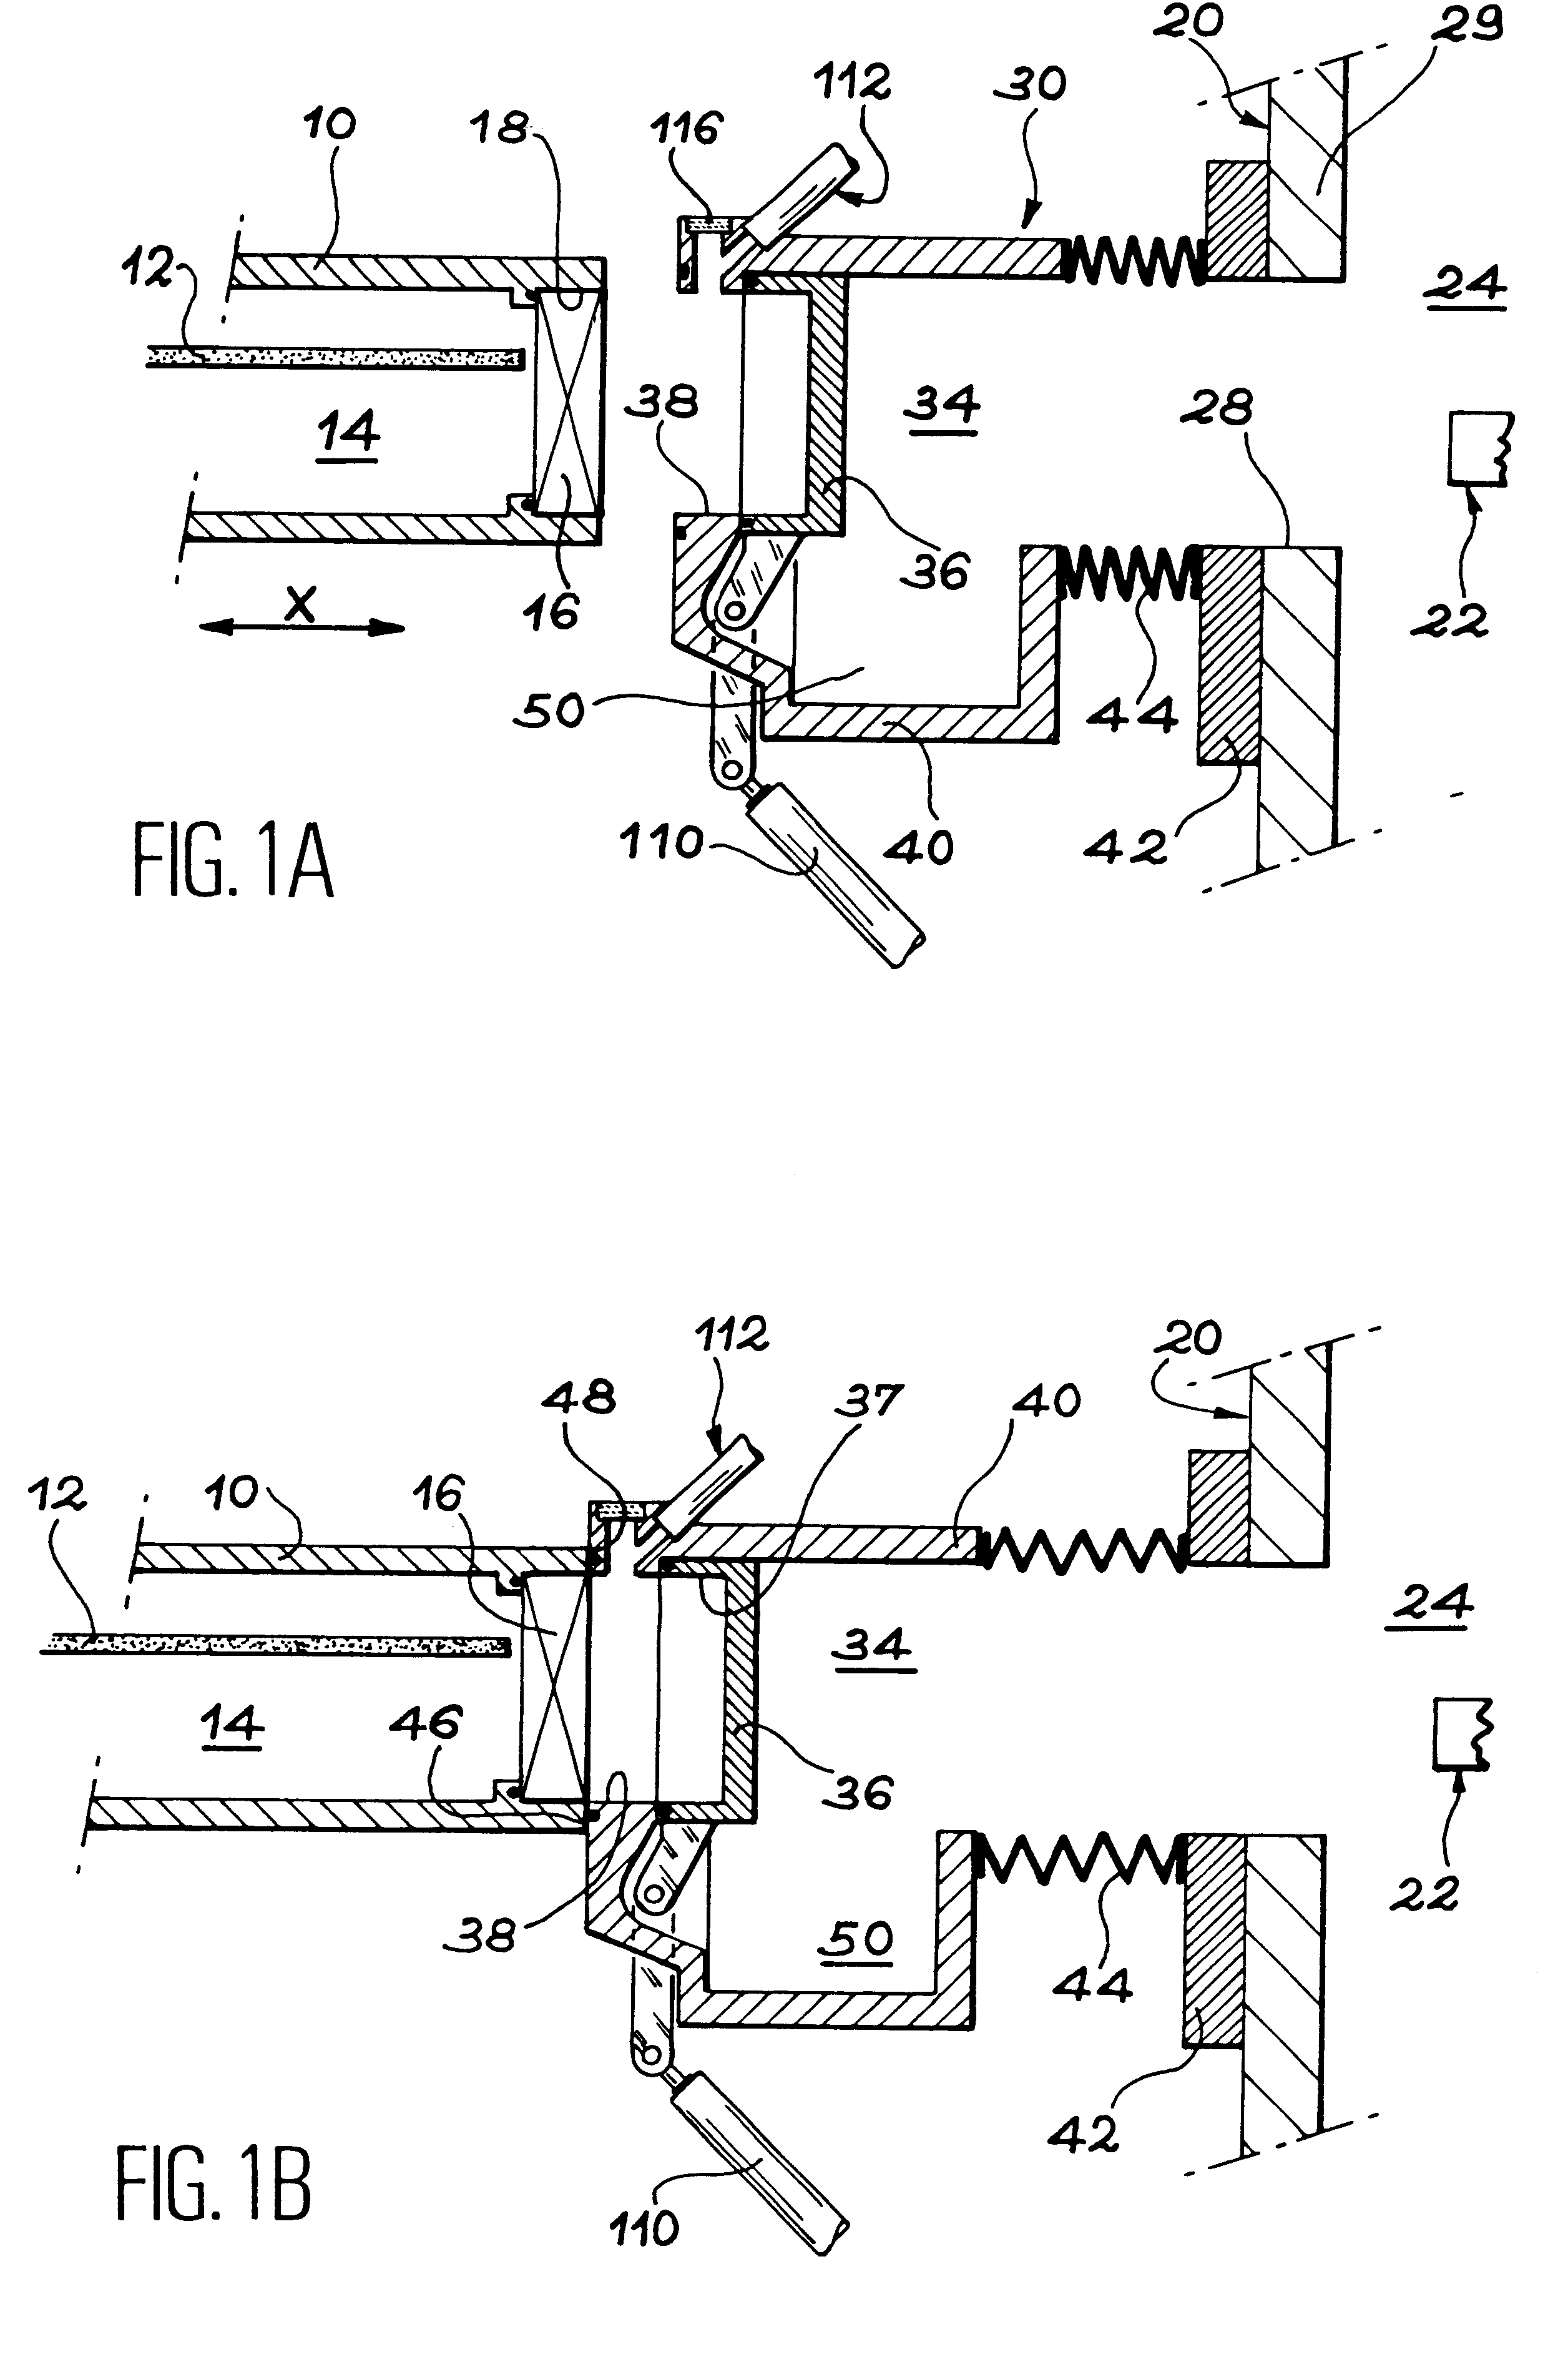 Coupling system for the transfer of a confined planar object from a containment pod to an object processing unit